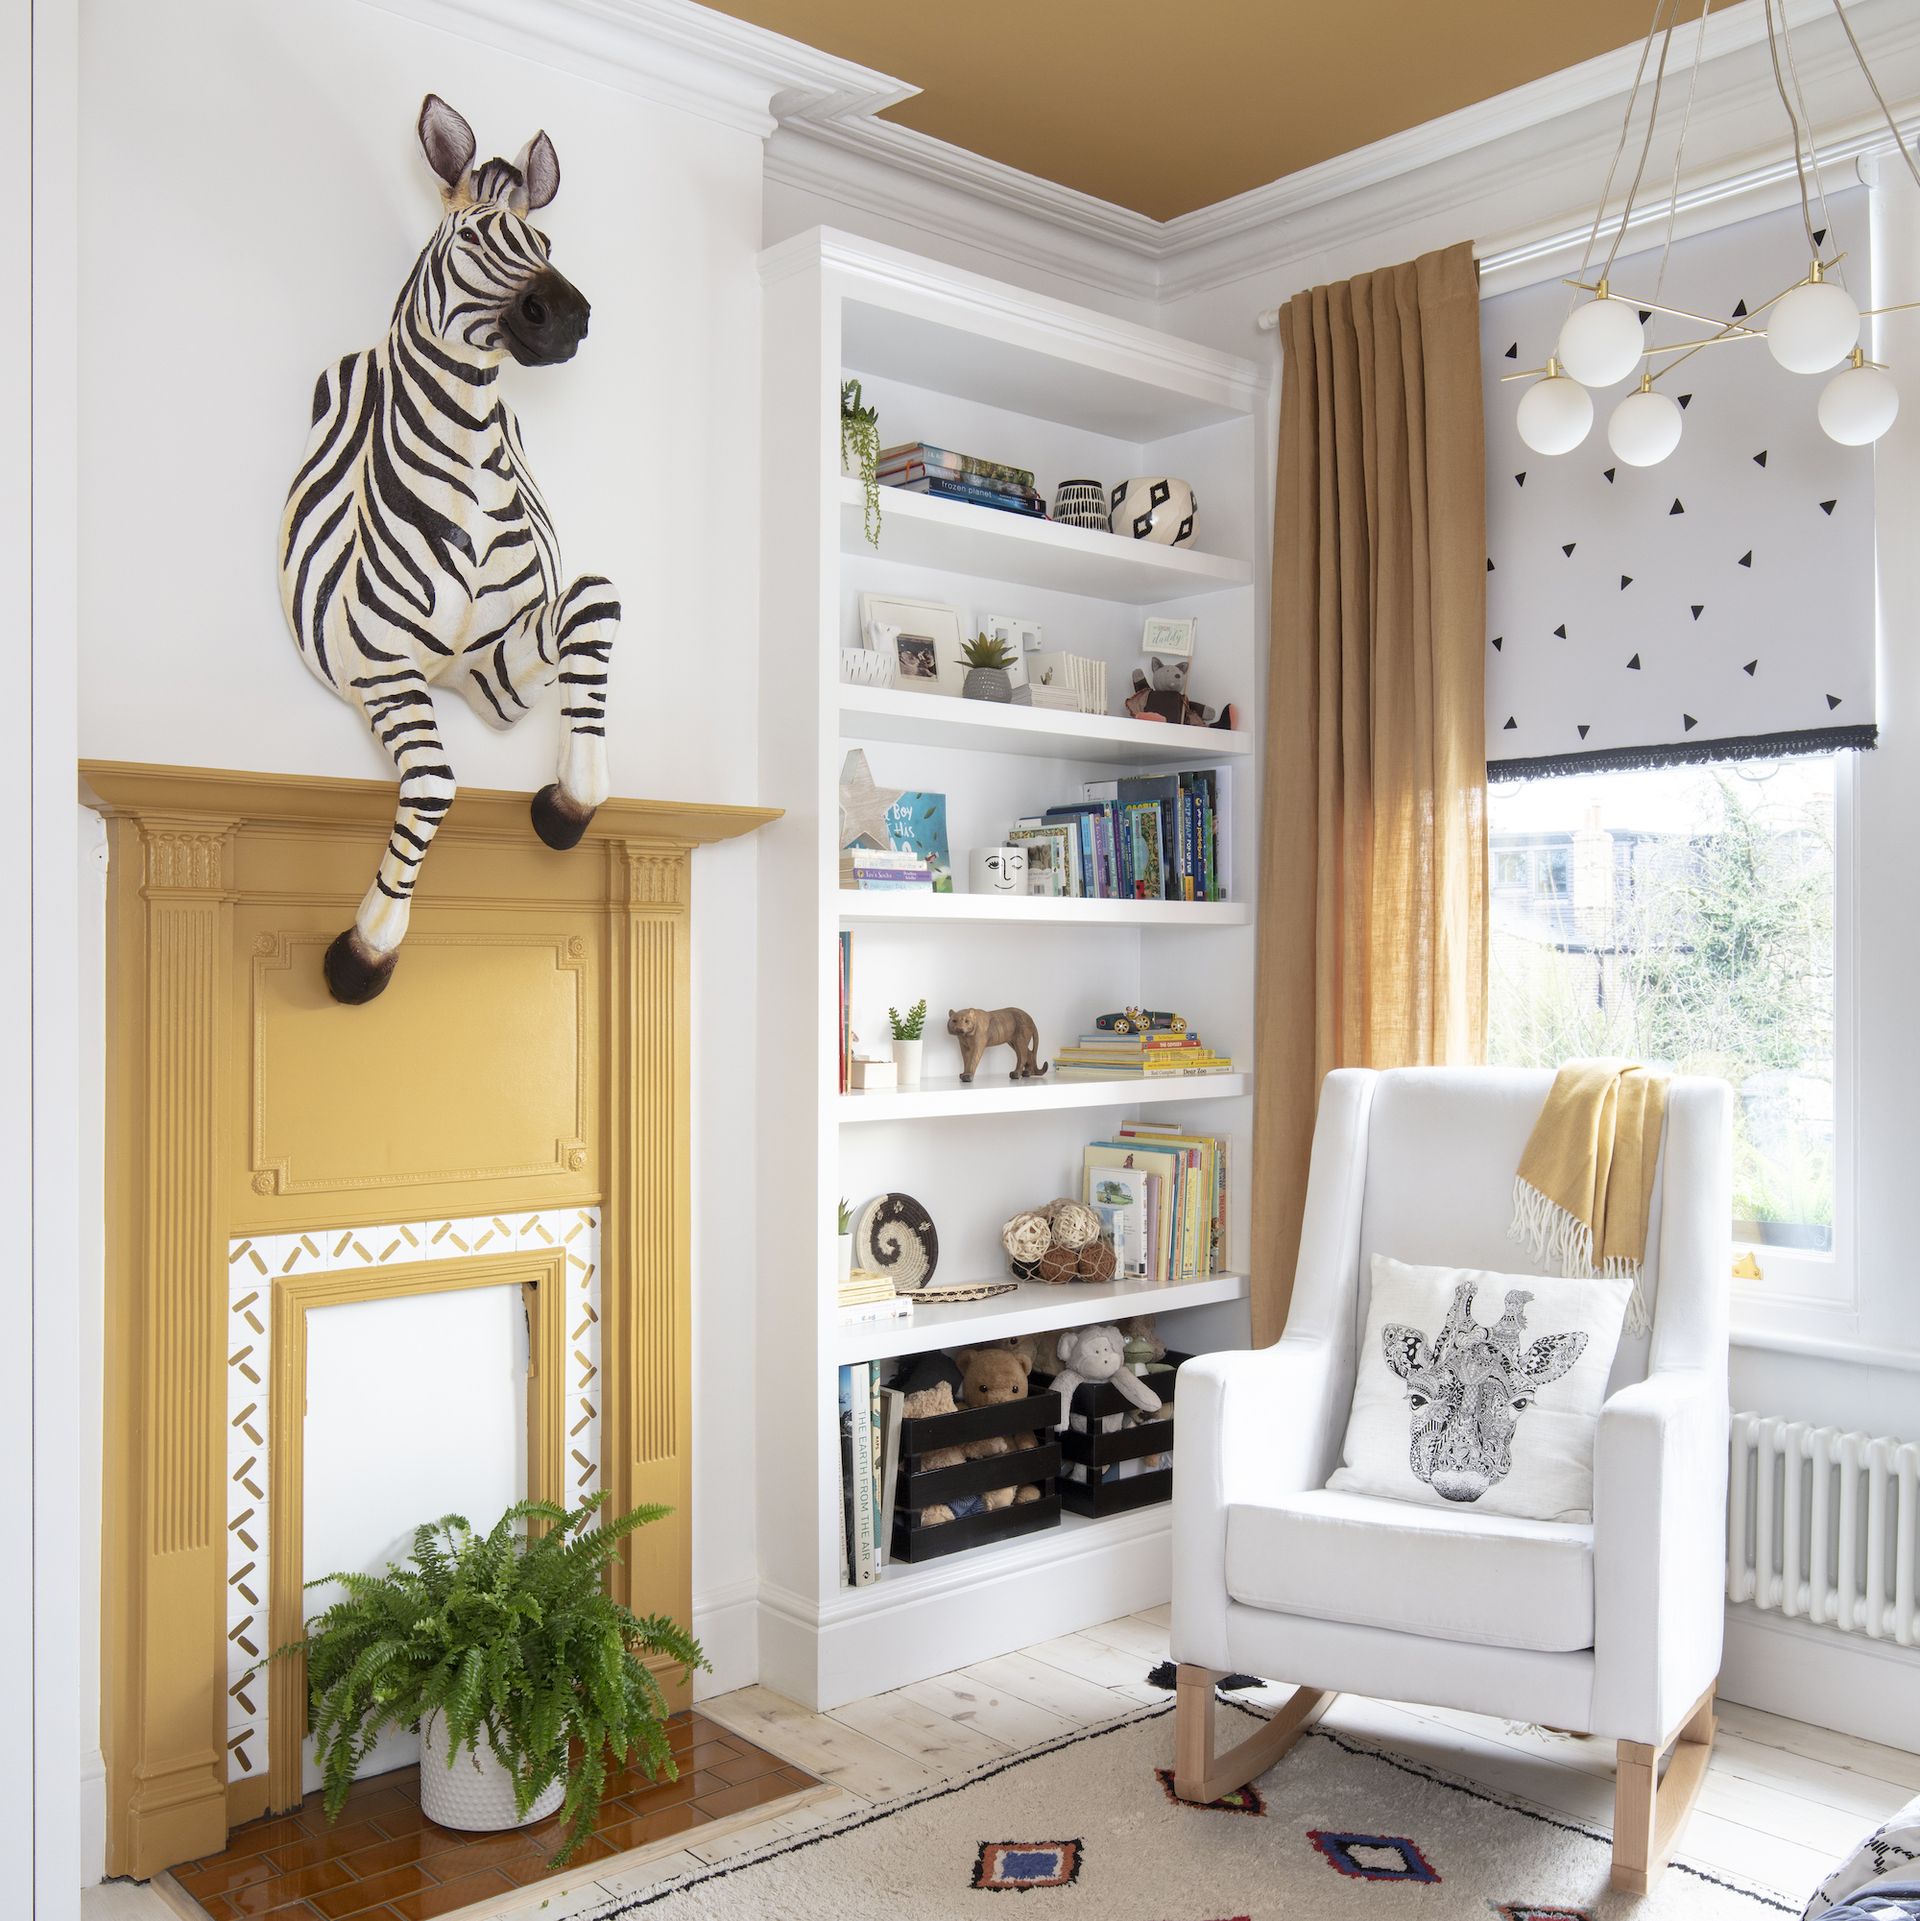 <p>                     It's entirely possible to create a nursery scheme that will suit a tiny tot and appeal to you, the parents.                   </p>                                      <p>                     Against the plain white walls, the mustard yellow on the ceiling, fireplace and curtains in this baby boy's nursery look smart and sophisticated, while the running zebra wall decoration adds a fun touch.                   </p>                                      <p>                     The running zebra wall hanging is a pricey piece but it's possible to find similar cheaper animal decorations.                   </p>